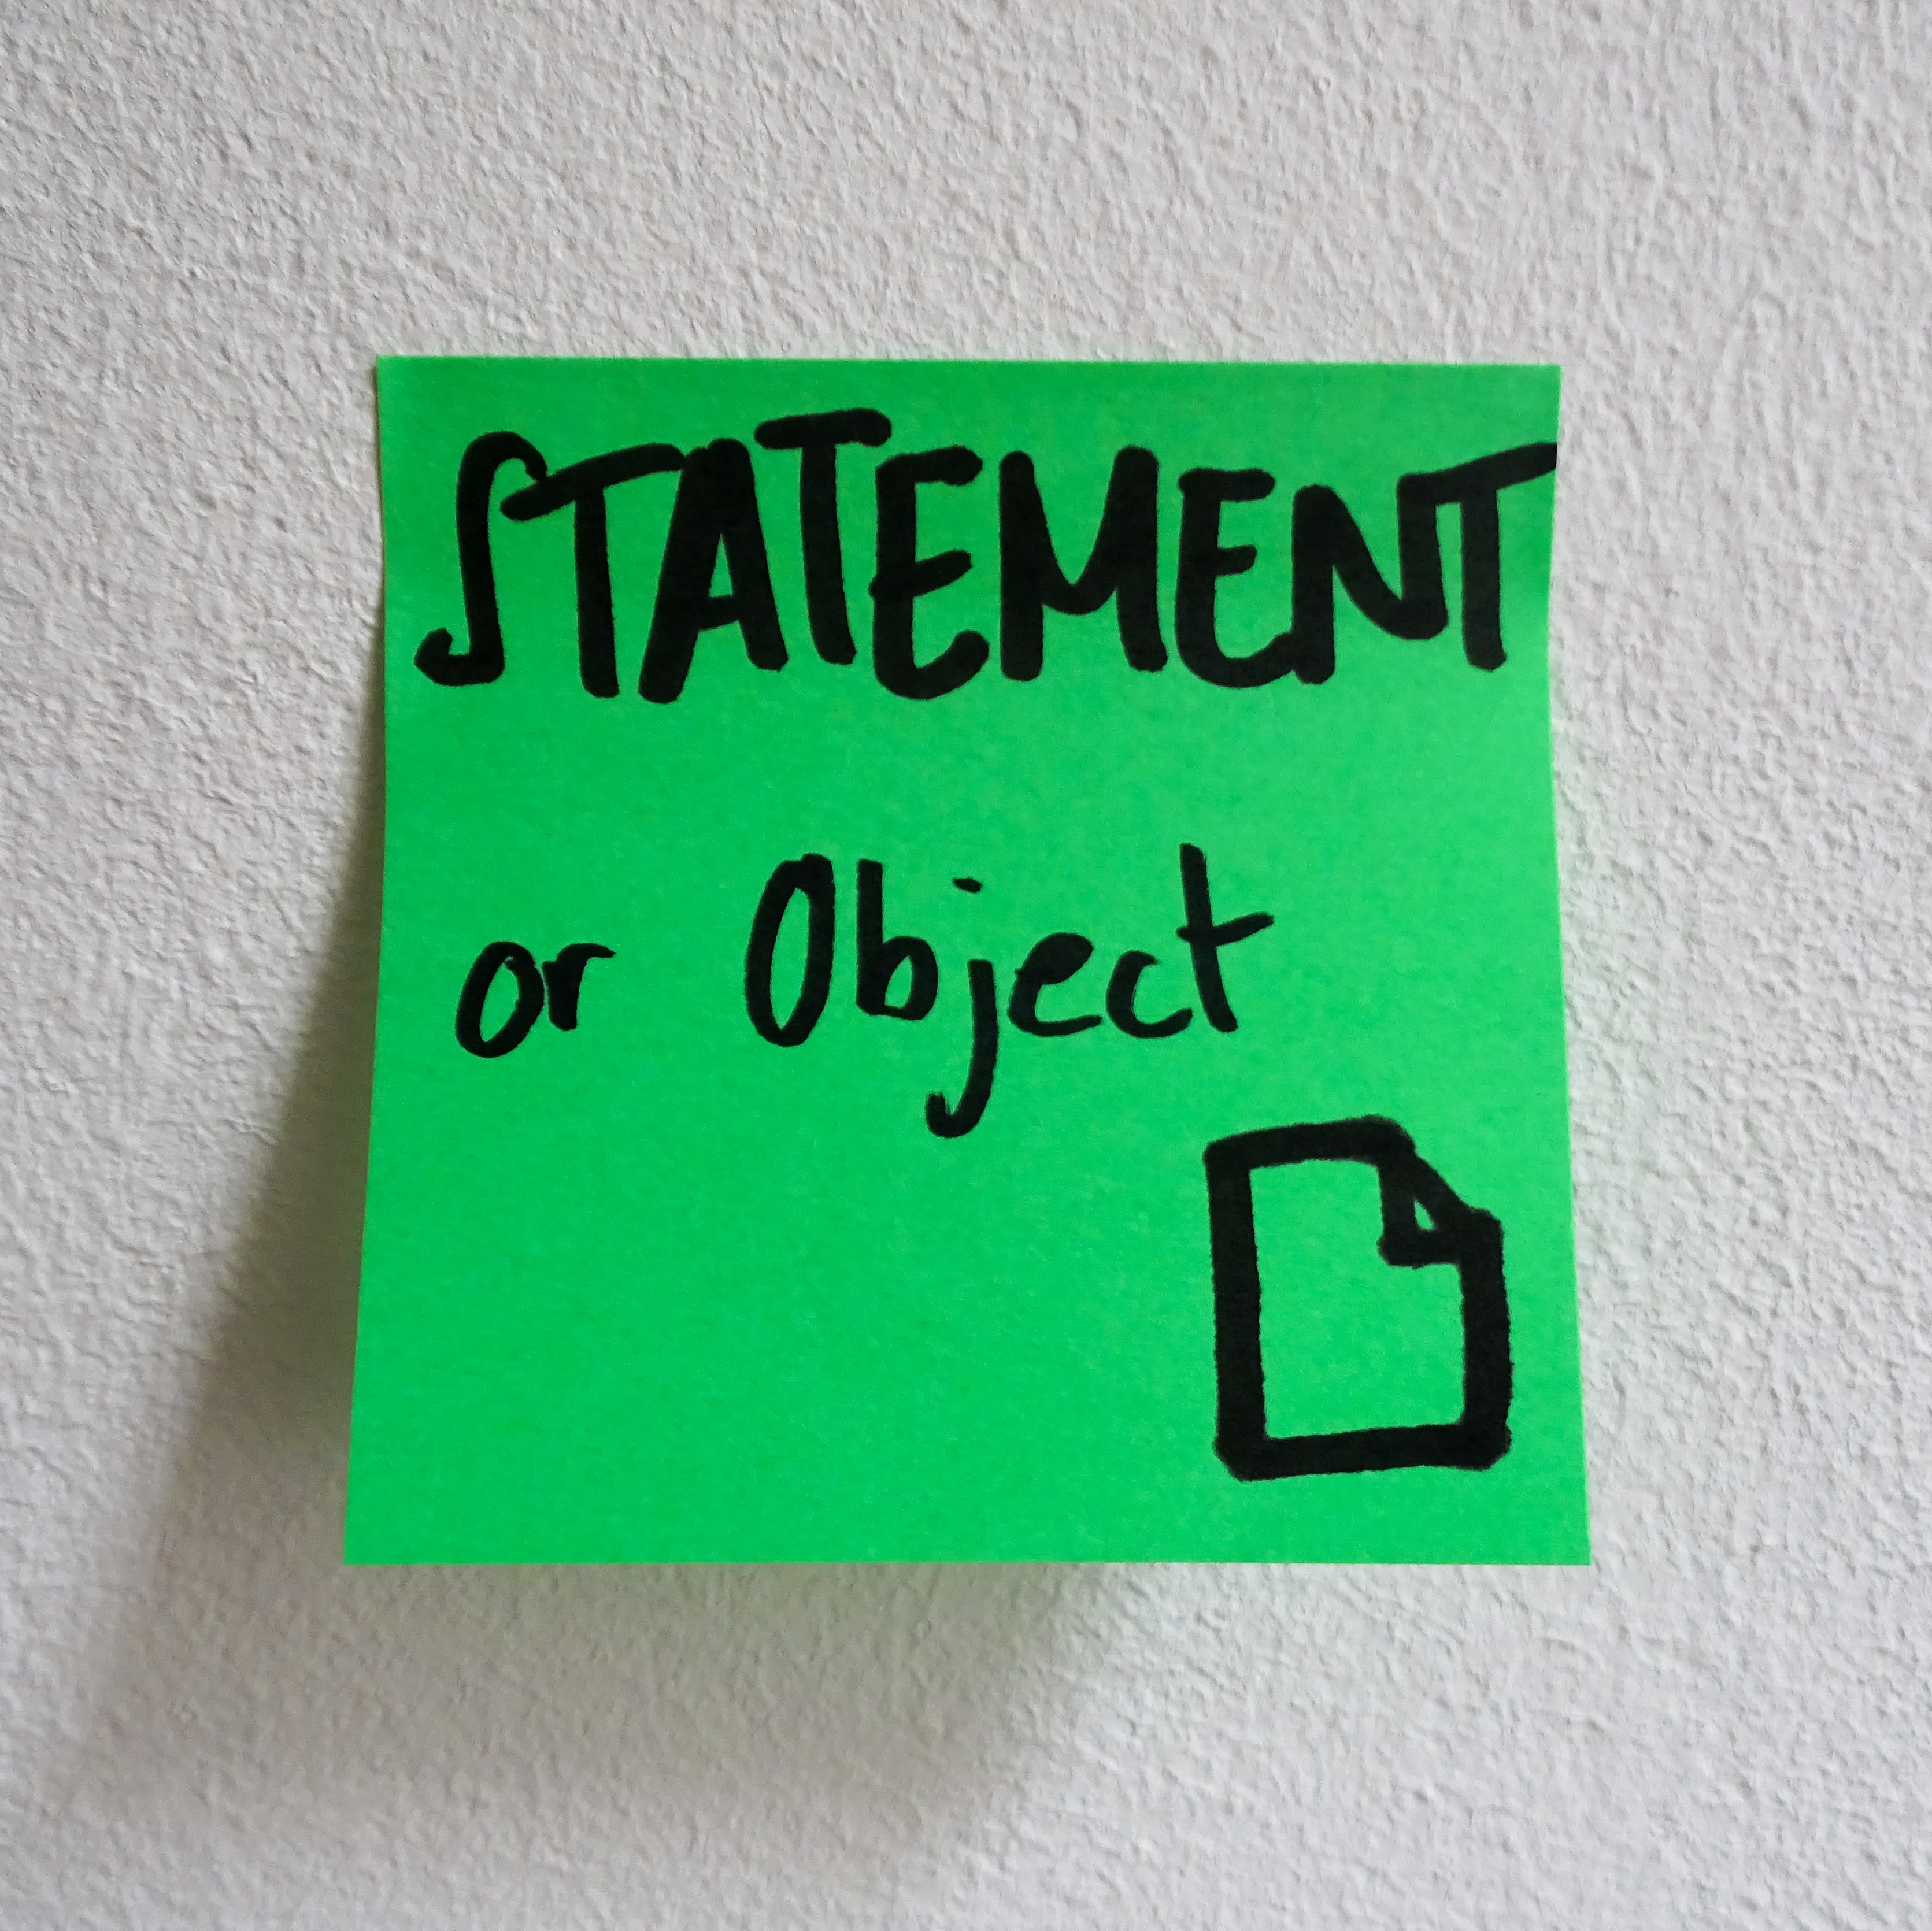 Statement (or Object)